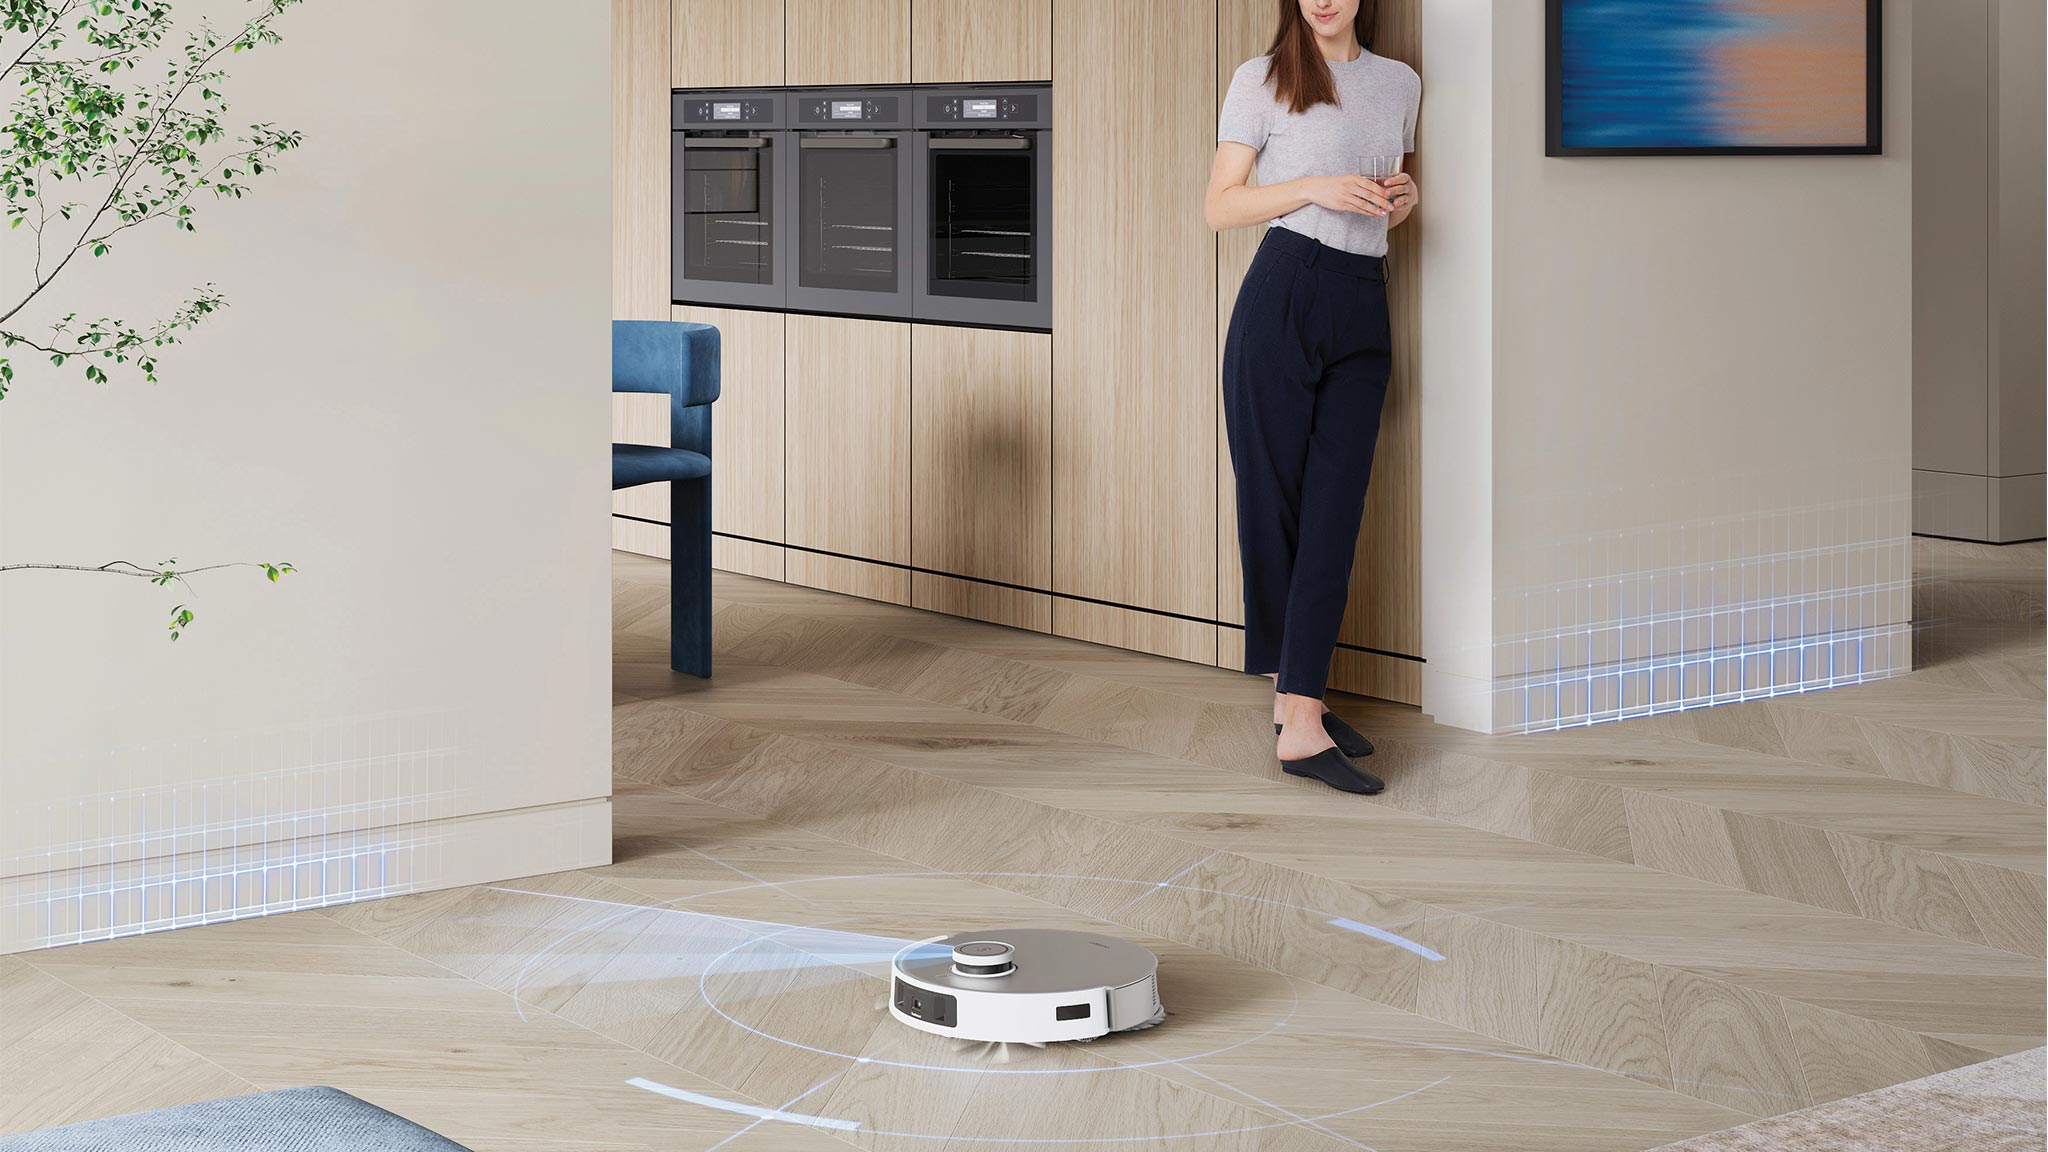  ECOVACS Winbot W1 Pro Window Cleaning Robot, Intelligent  Cleaning with Dual Cross Water Spray Technology, Win SLAM 3.0 Path  Planning, 2800Pa Suction Power, Edge Detection Technology, App Control,Grey